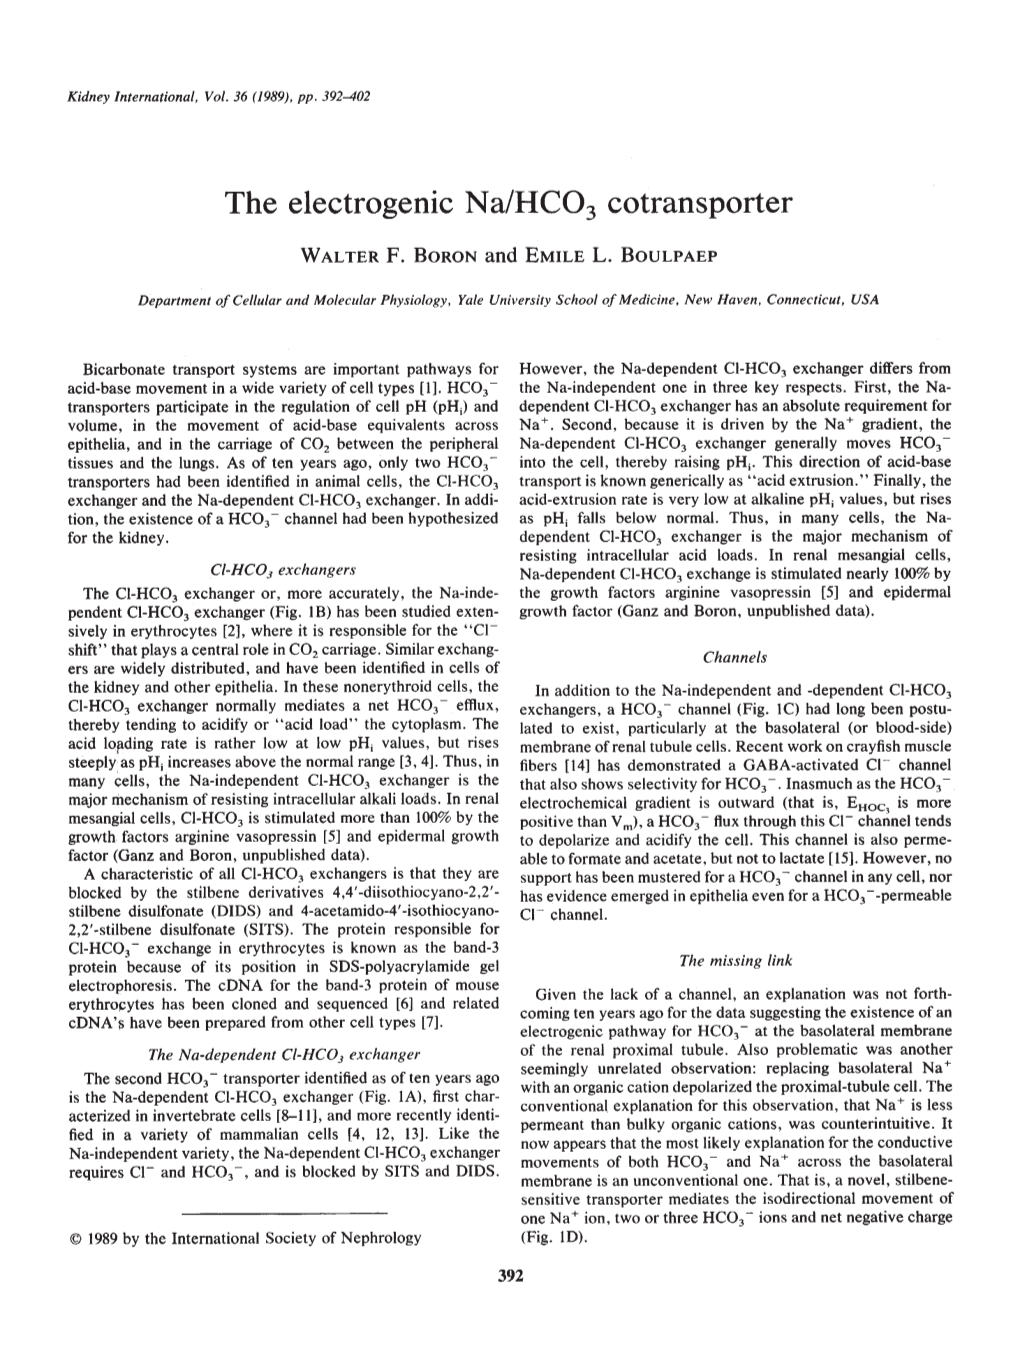 The Electrogenic Na/HCO3 Cotransporter WALTER F